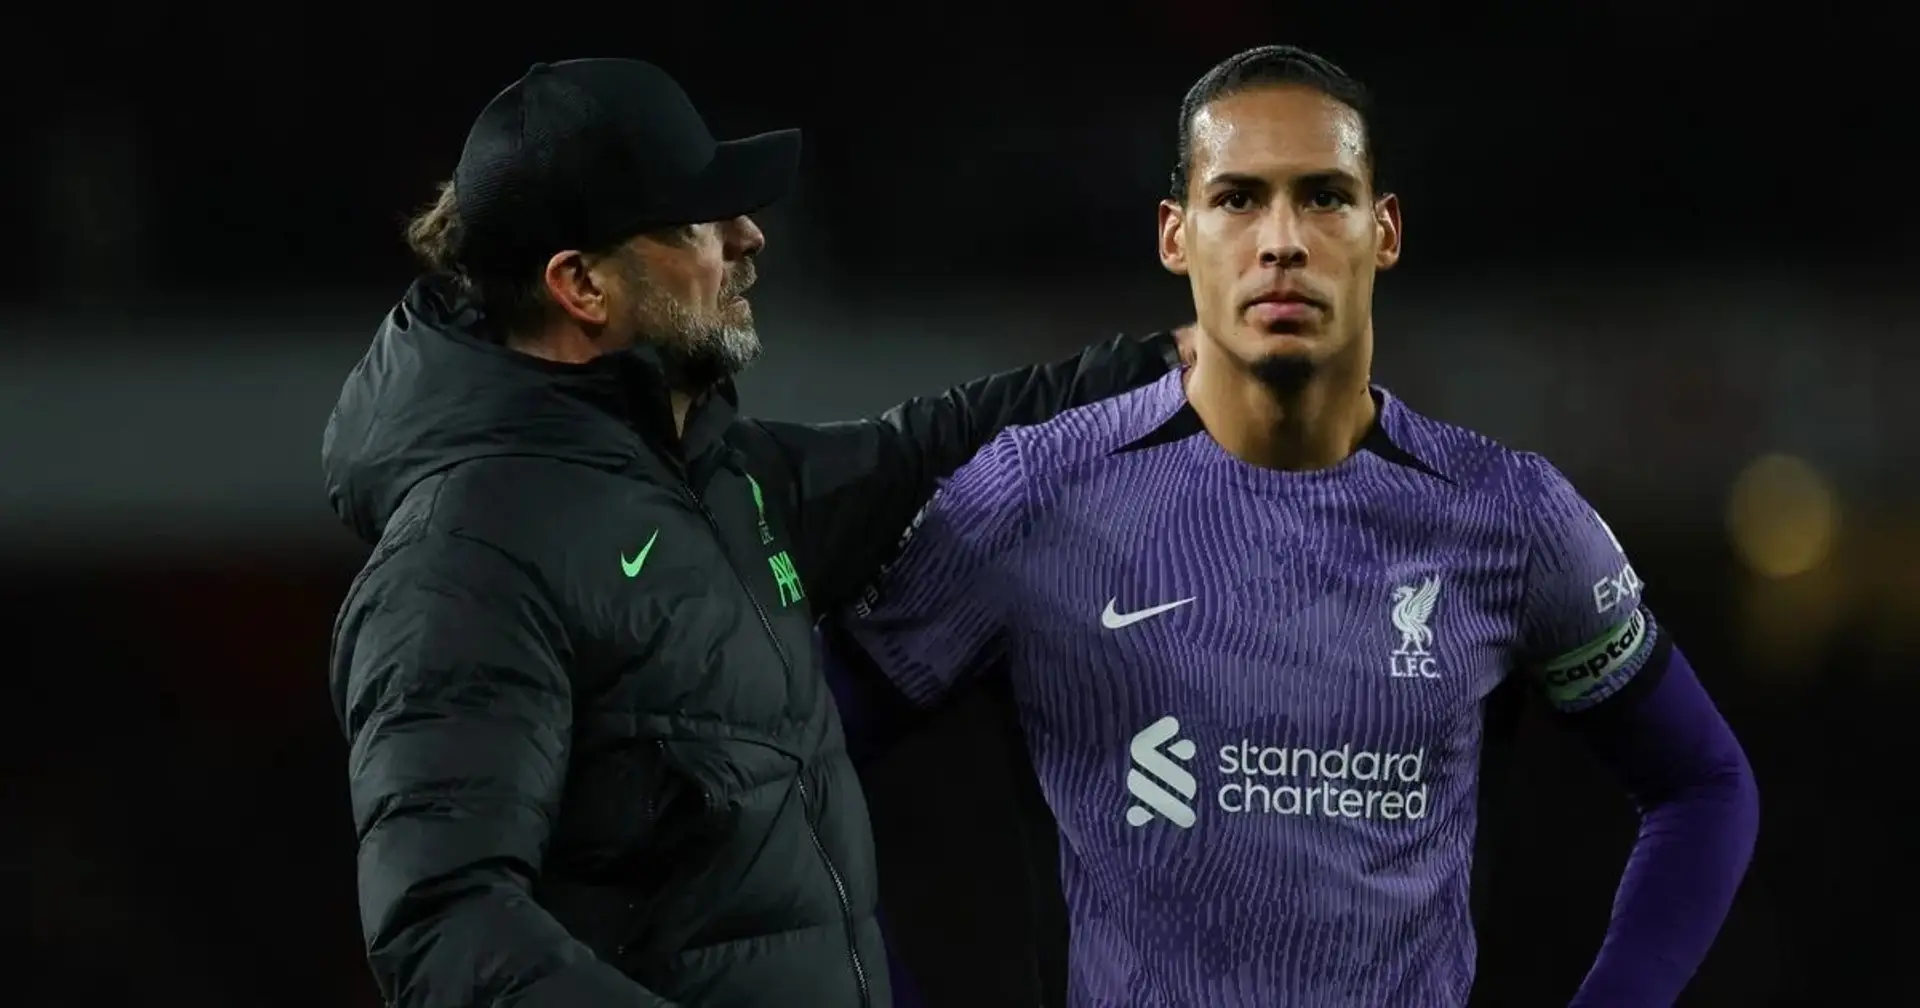 'This is going to rock the footballing world': Trent reveals Van Dijk's first words after Klopp's exit announcement